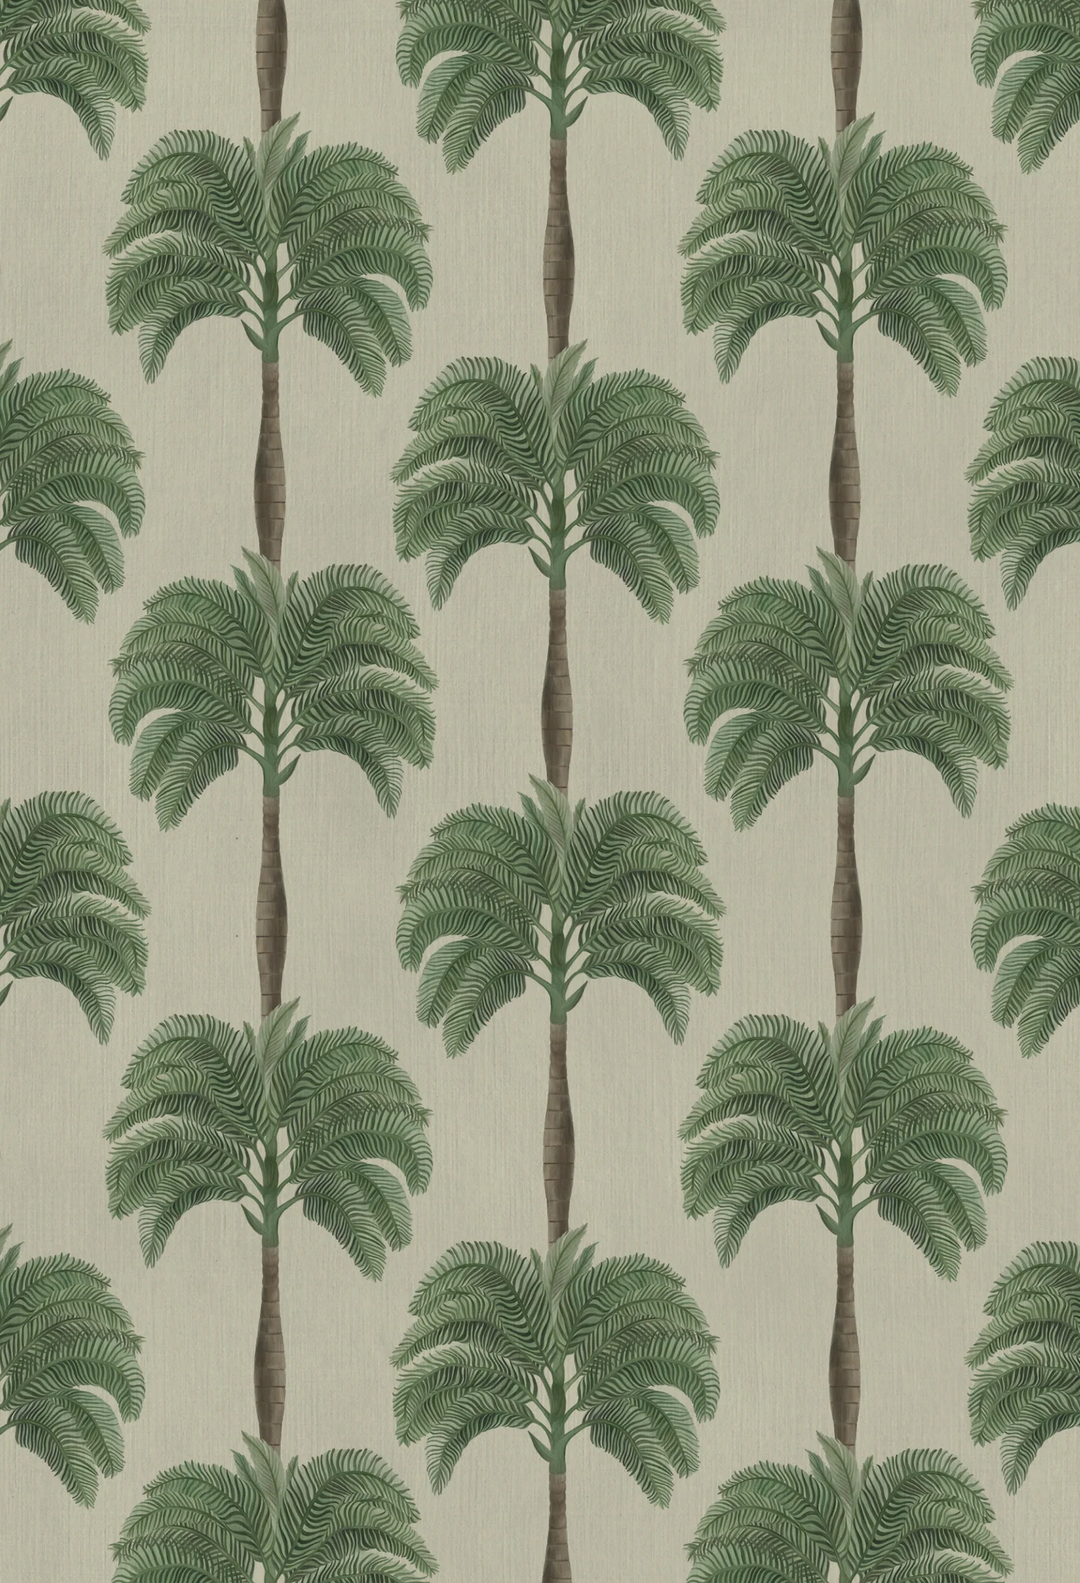 Deus-ex-gardenia-little-palma-wallpaper-small-palm-repeat-lagoon-sand-beige-background-tropical-palm-hand-illustrated-pattern-trees